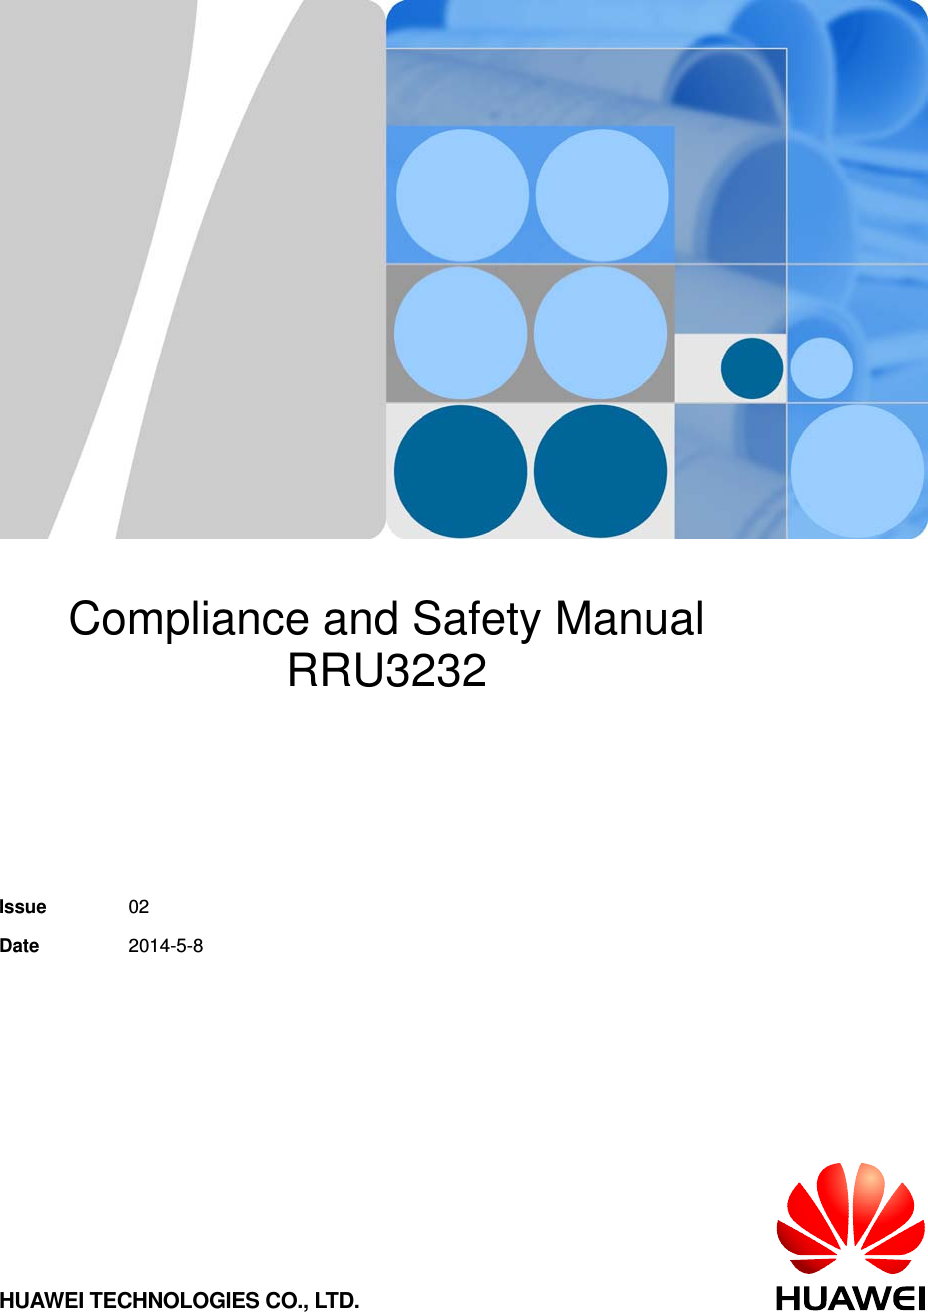        Compliance and Safety Manual RRU3232    Issue  02 Date  2014-5-8 HUAWEI TECHNOLOGIES CO., LTD. 